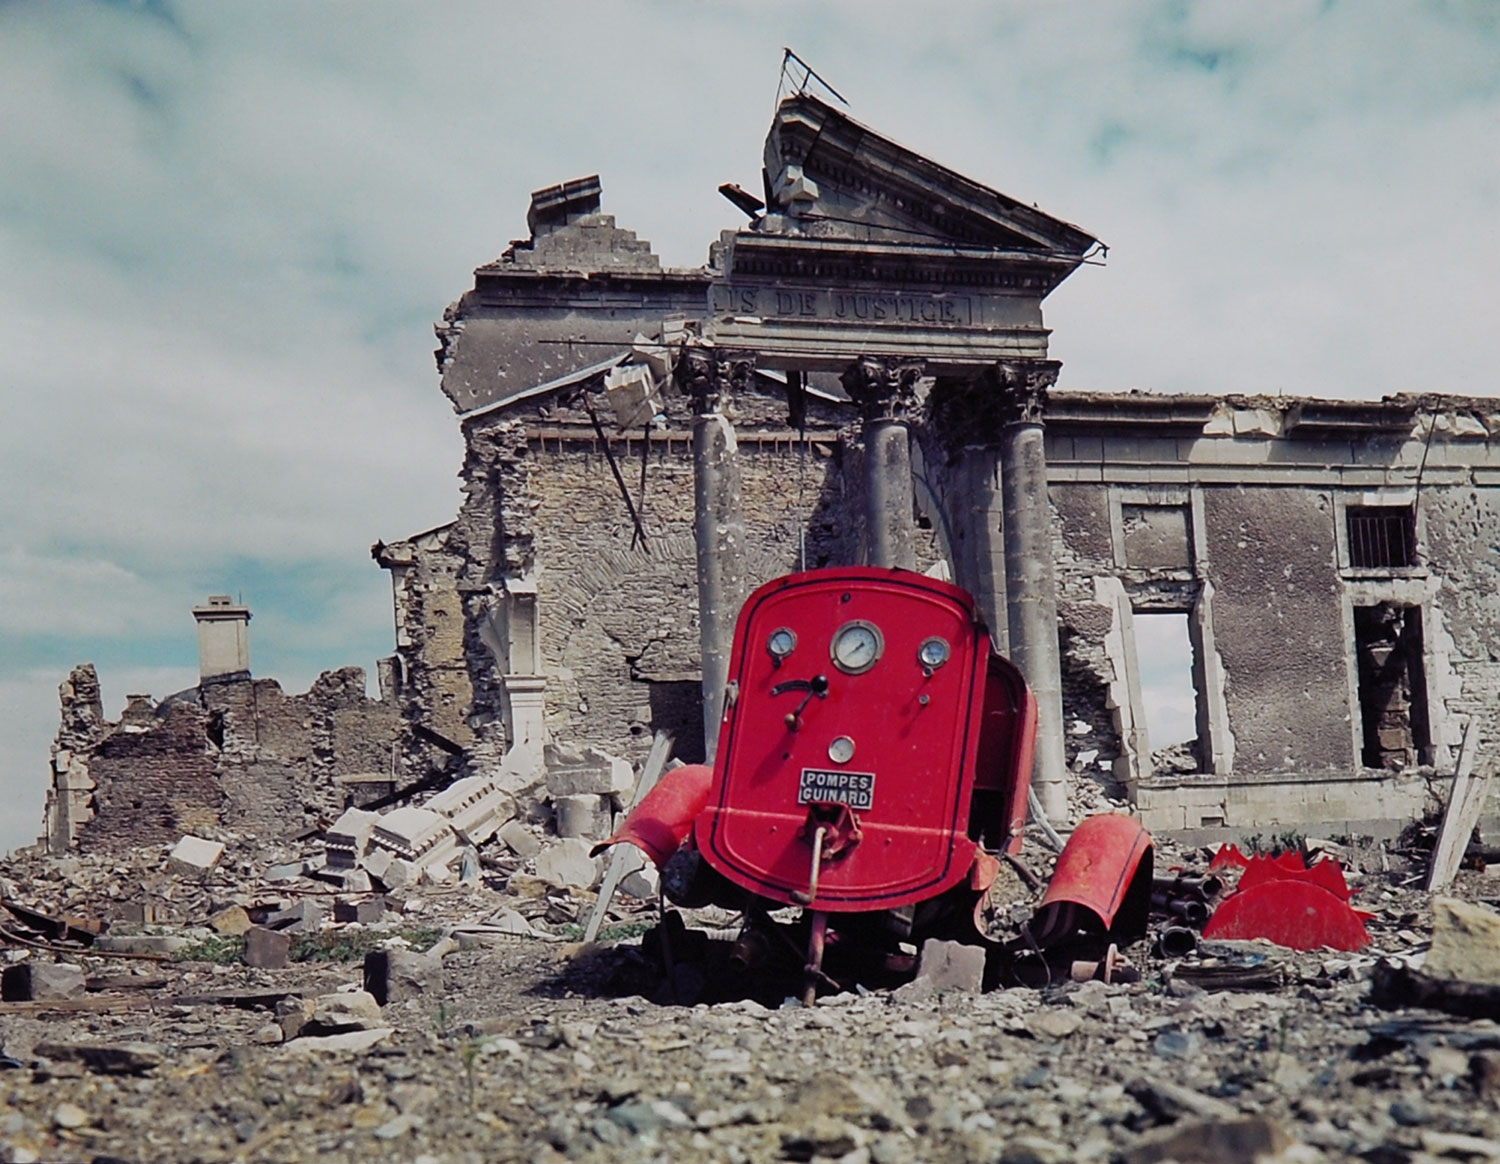 View of the ruins of the Palais de Justice in the town of St. Lo, France, summer 1944. The red metal frame in the foreground is what's left of an obliterated fire engine.